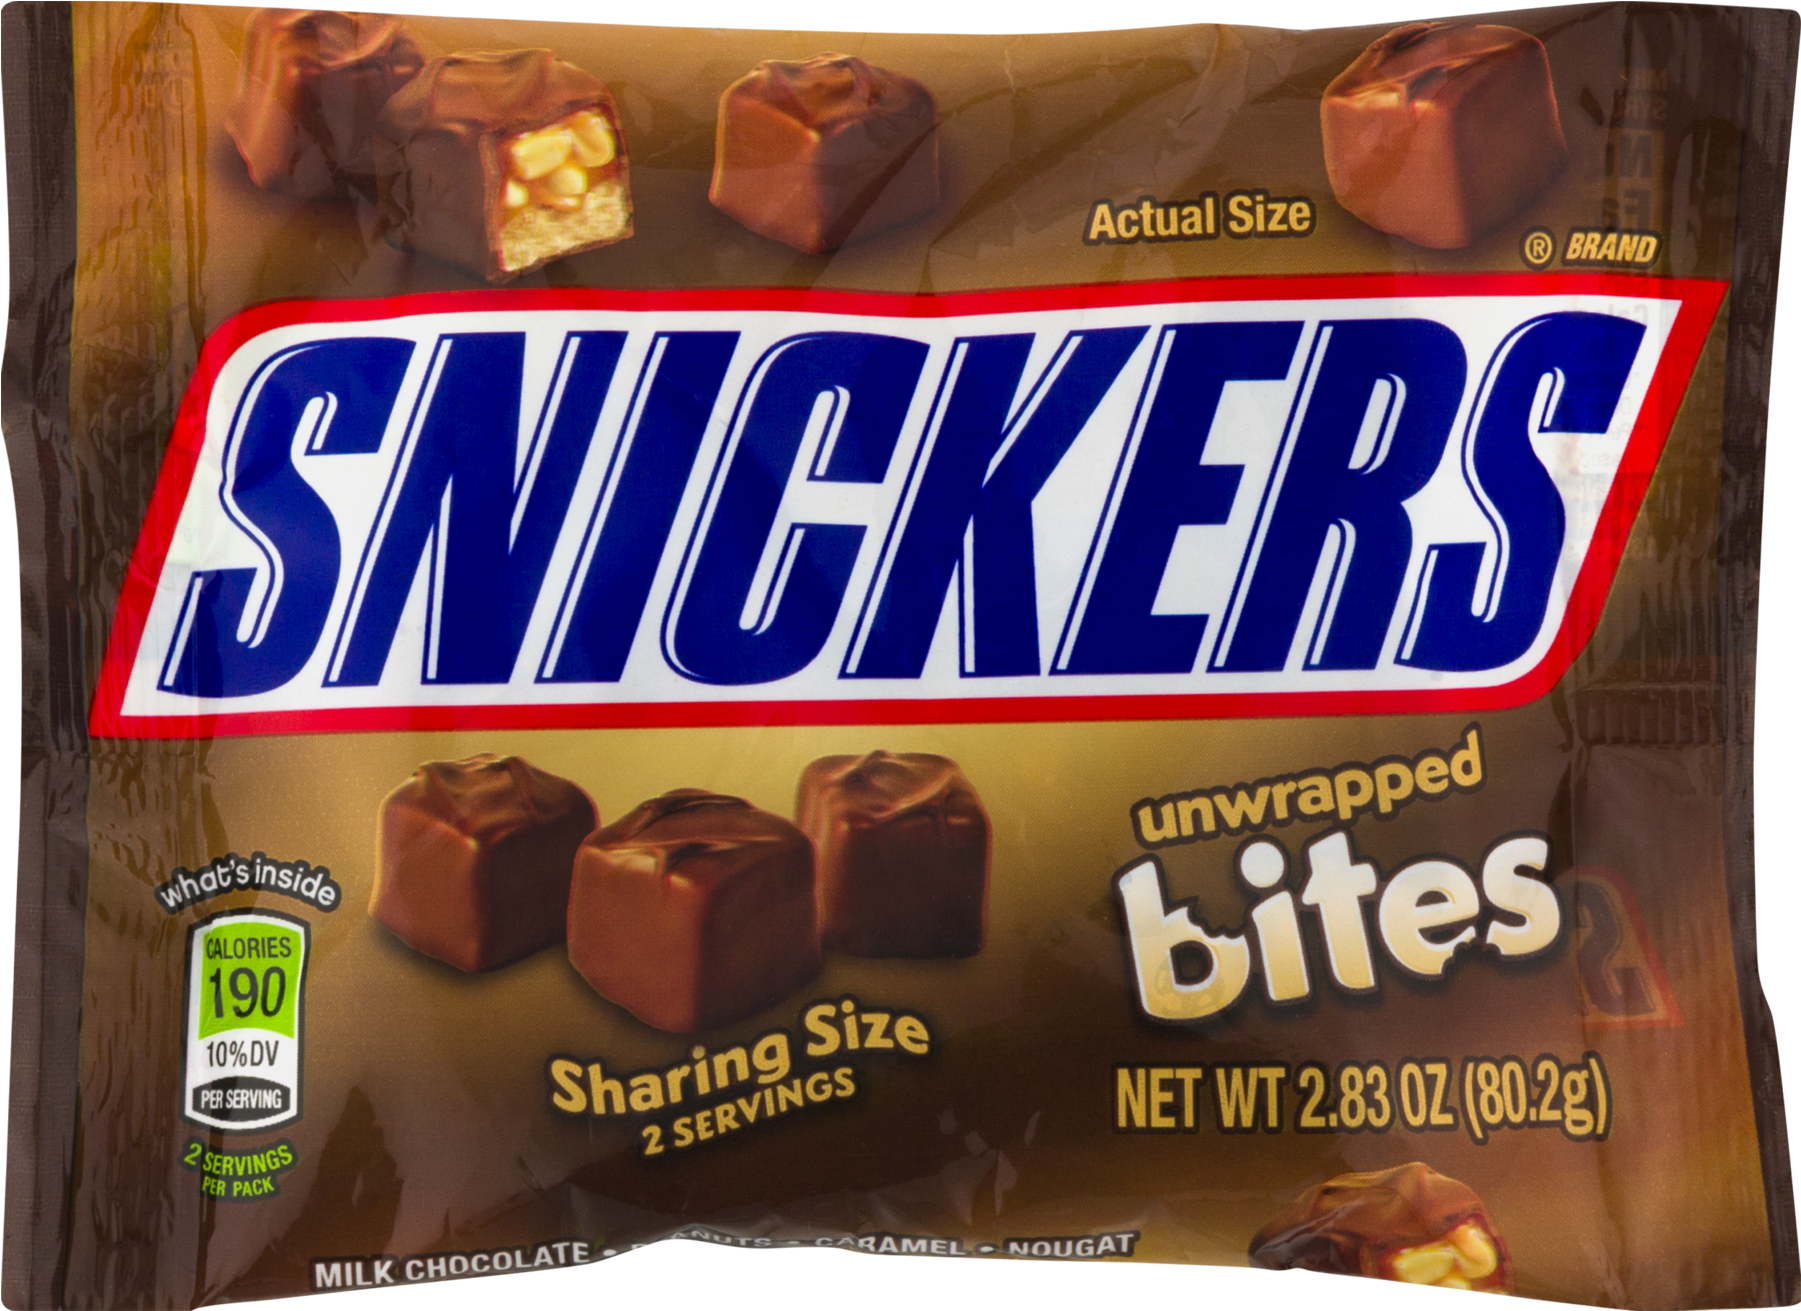 Snickers Sharing Size Bites, Unwrapped - 2.83 Oz Bag (1800x1800)